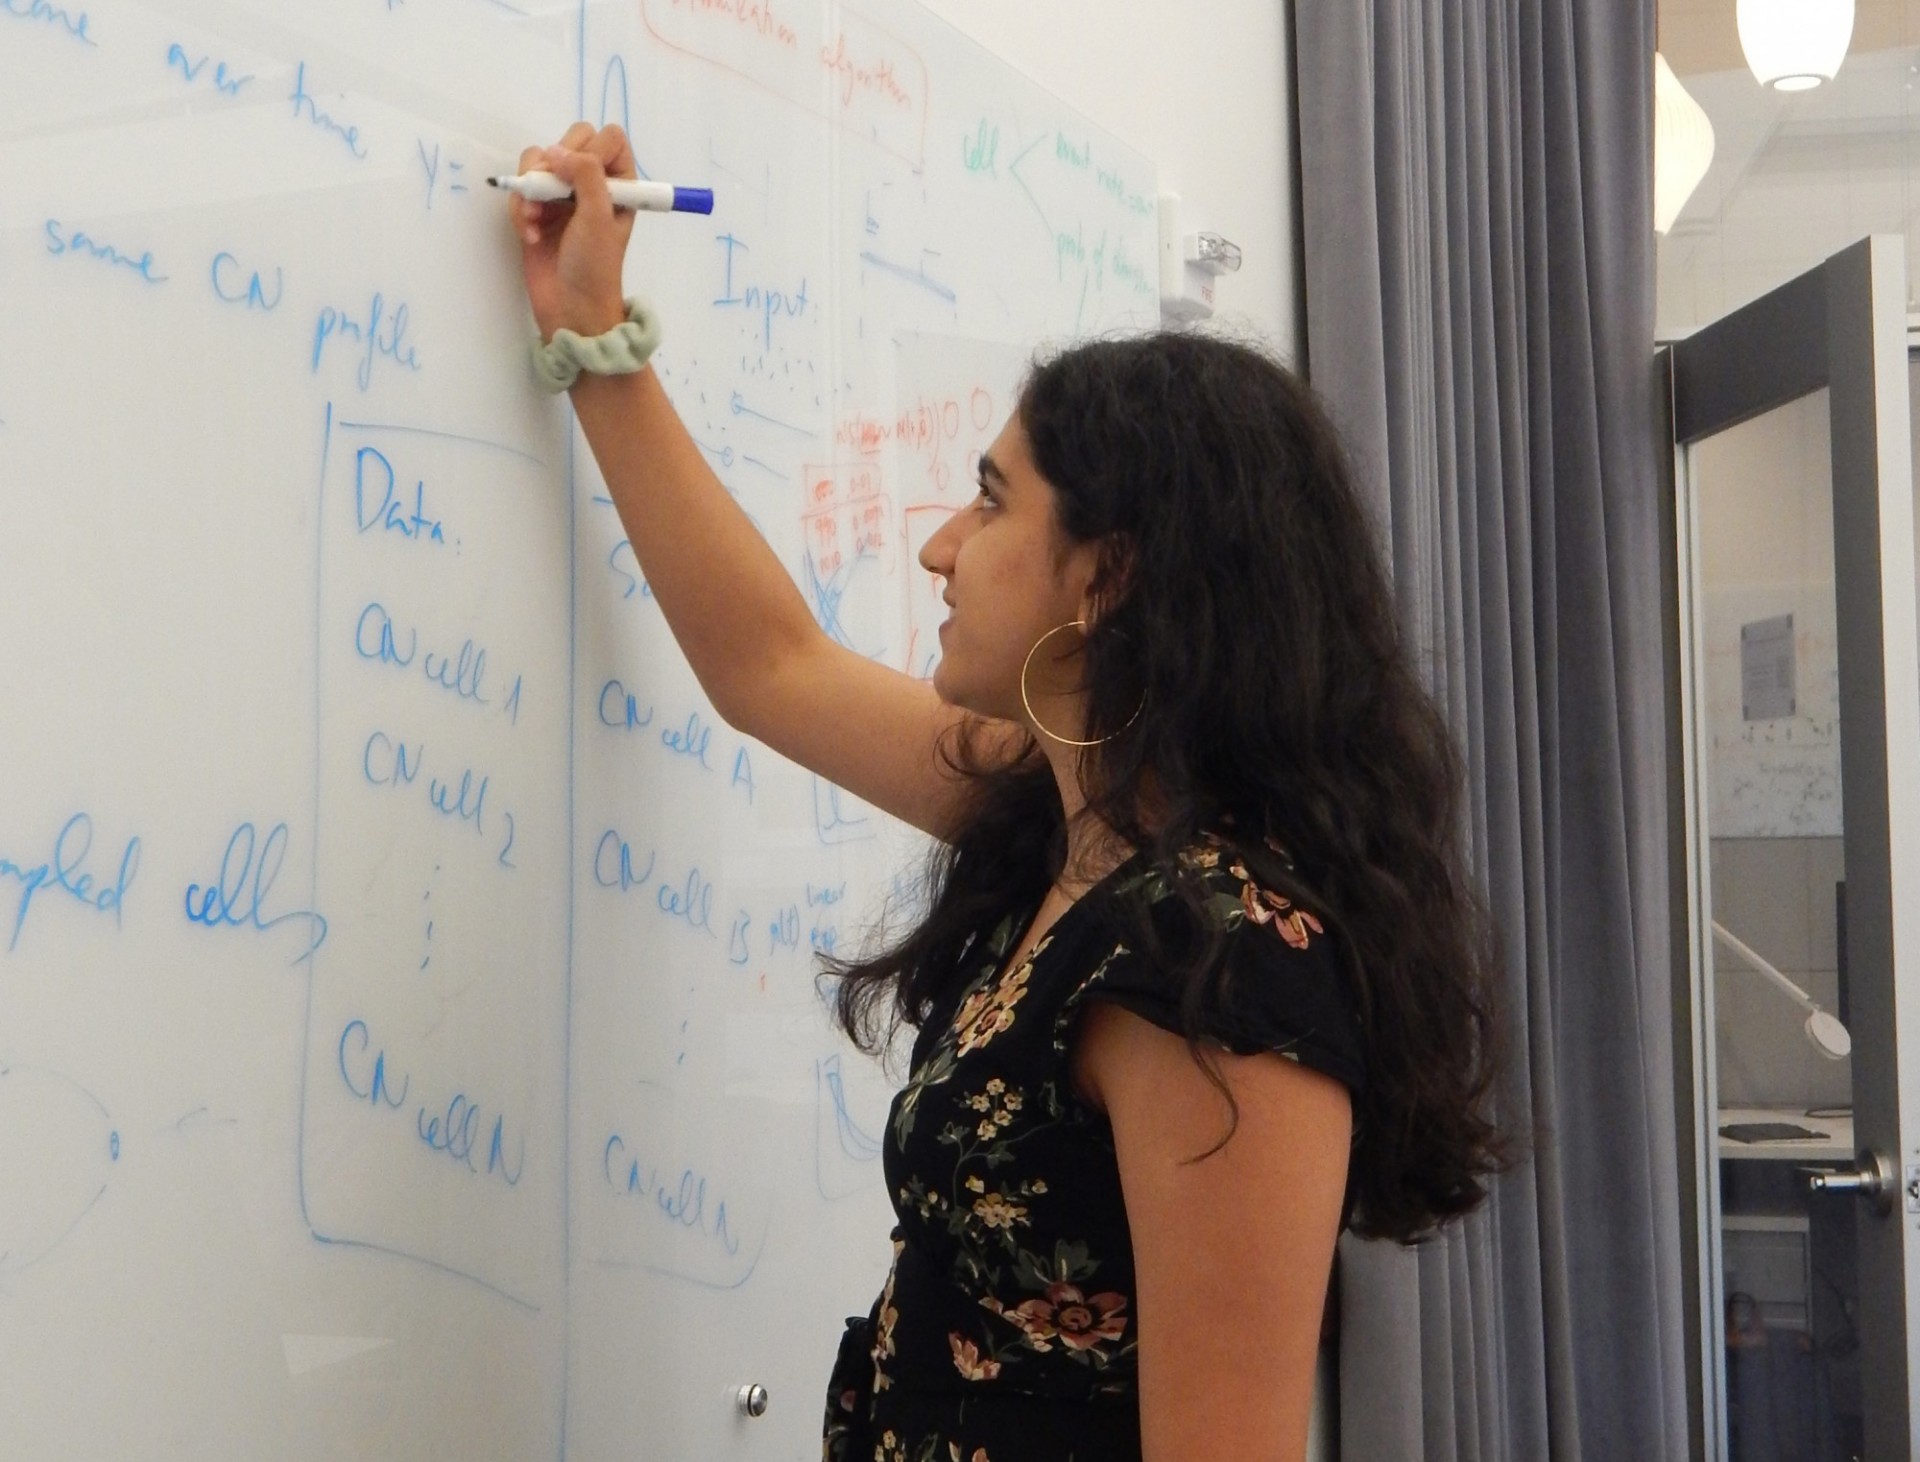 Woman writing on a white board